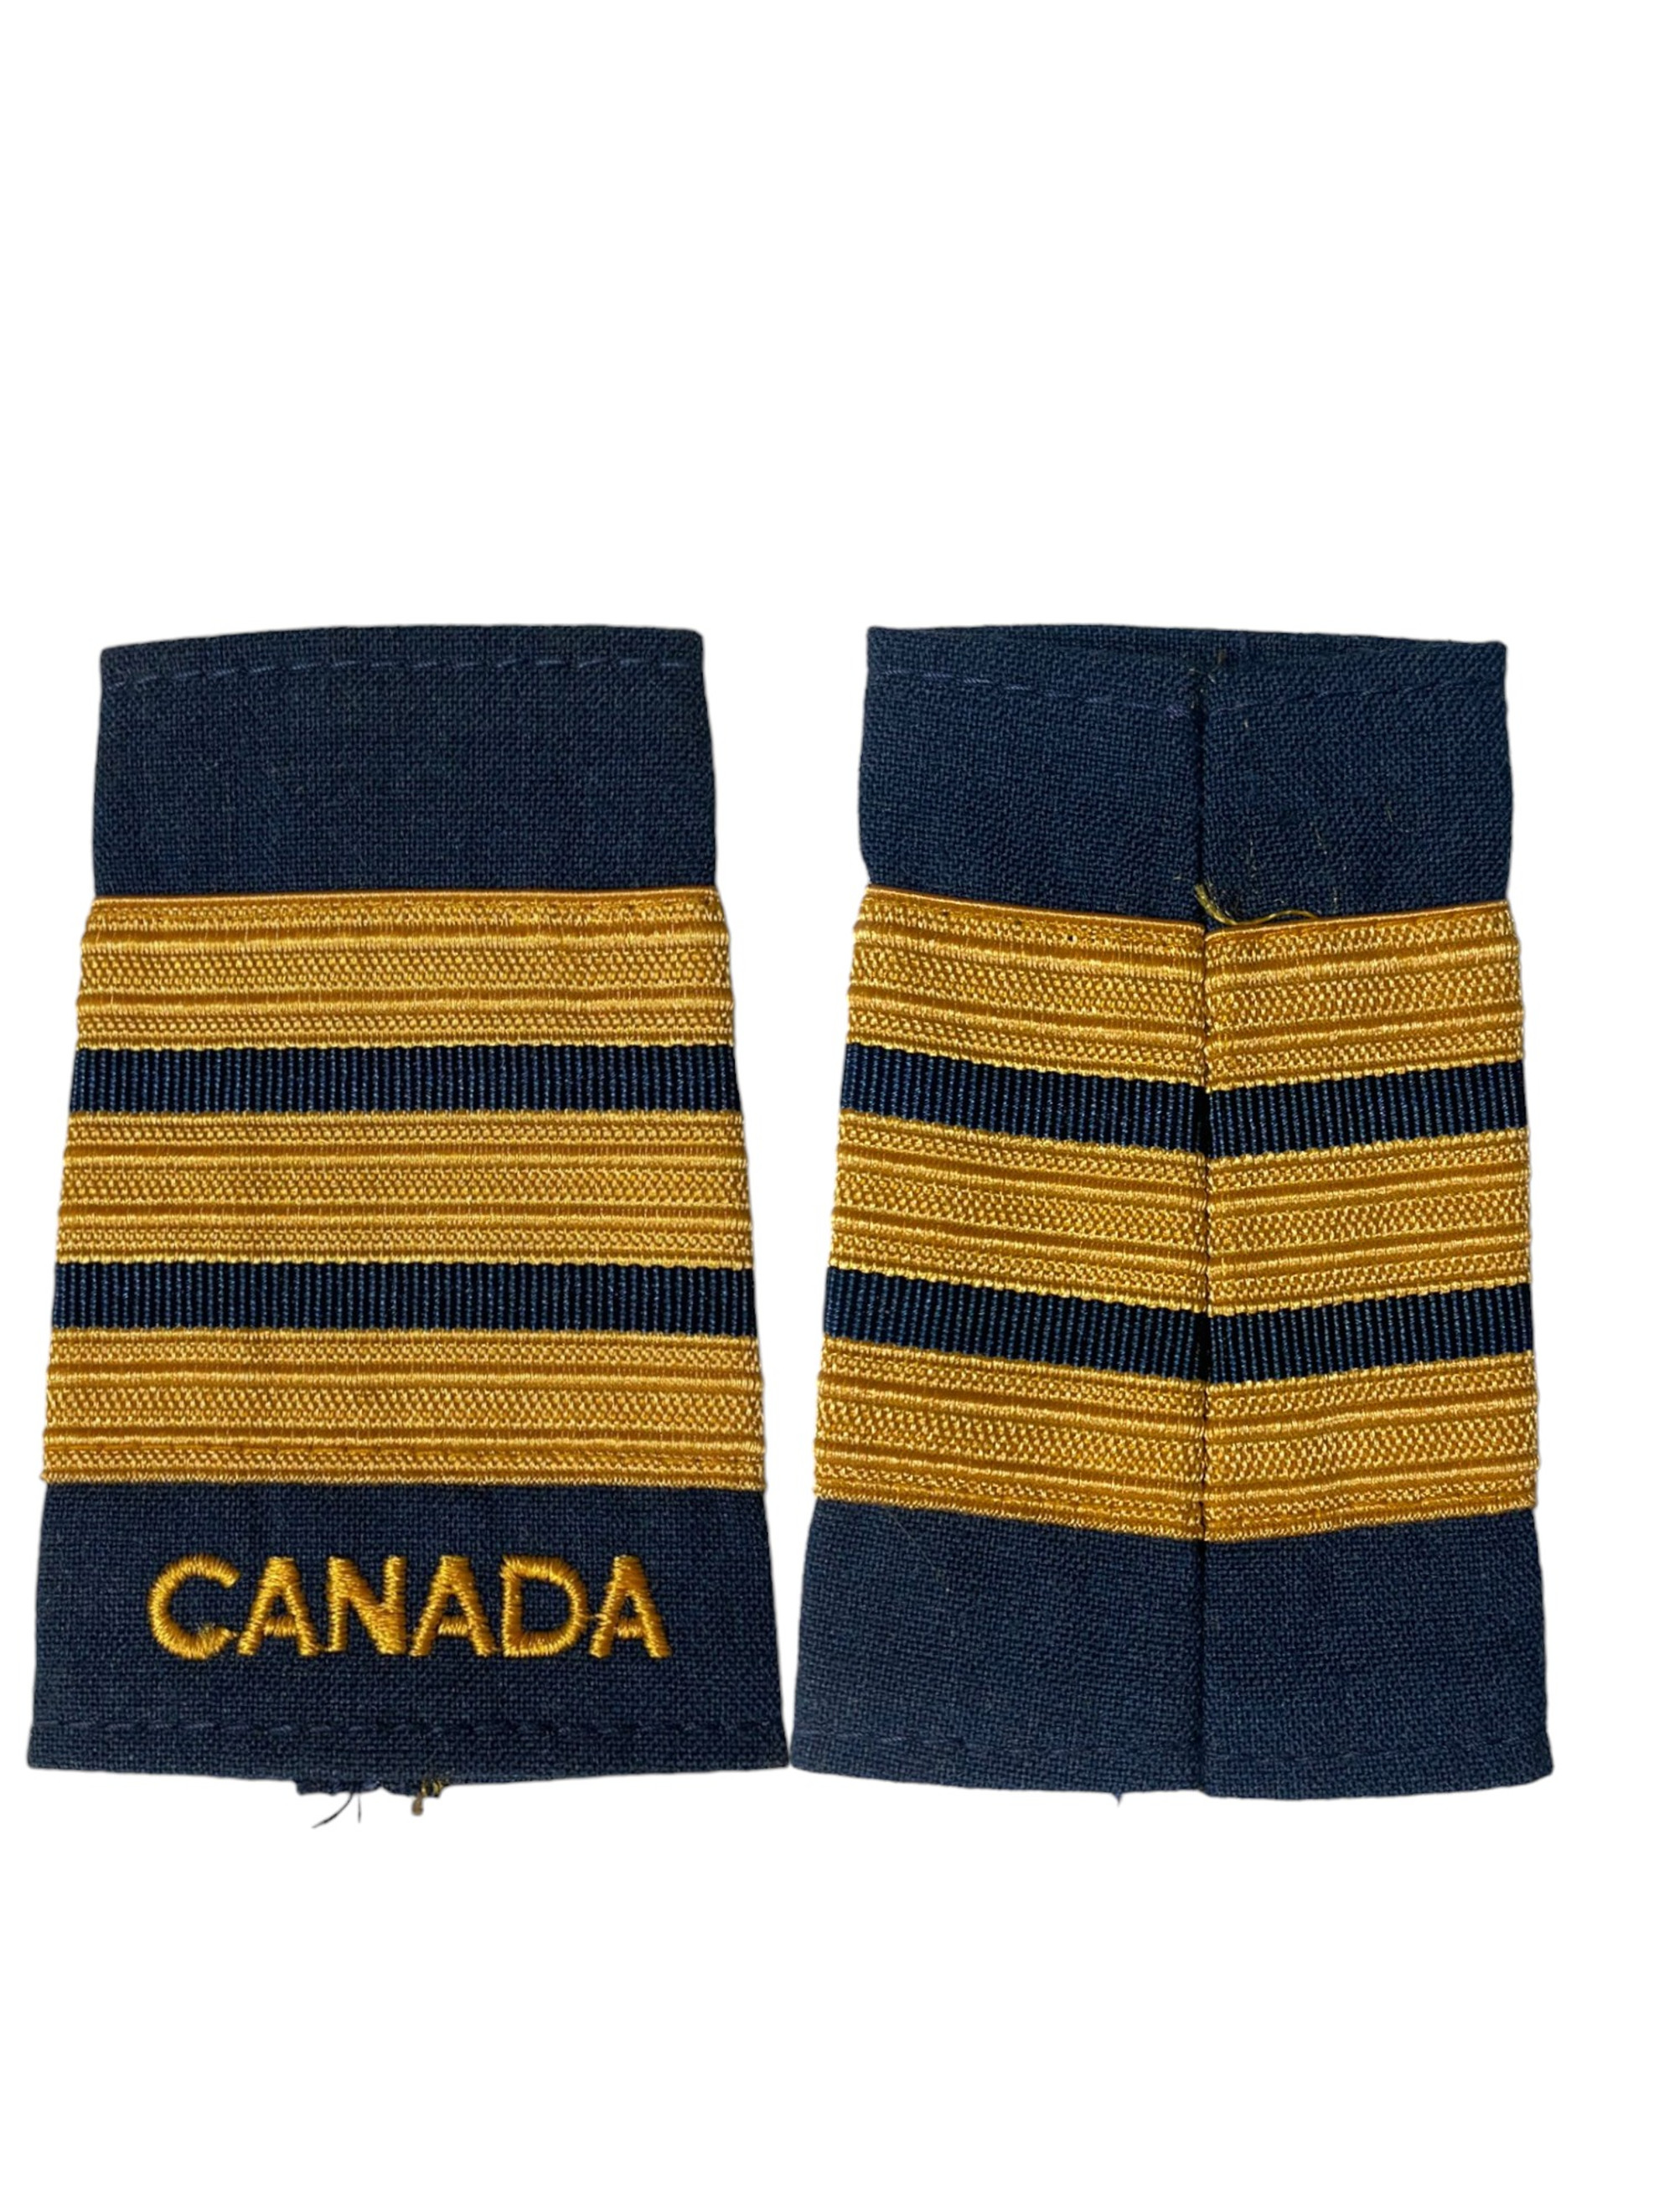 Canadian Armed Forces Rank Epaulets Air Force - Lieutenant Colonel